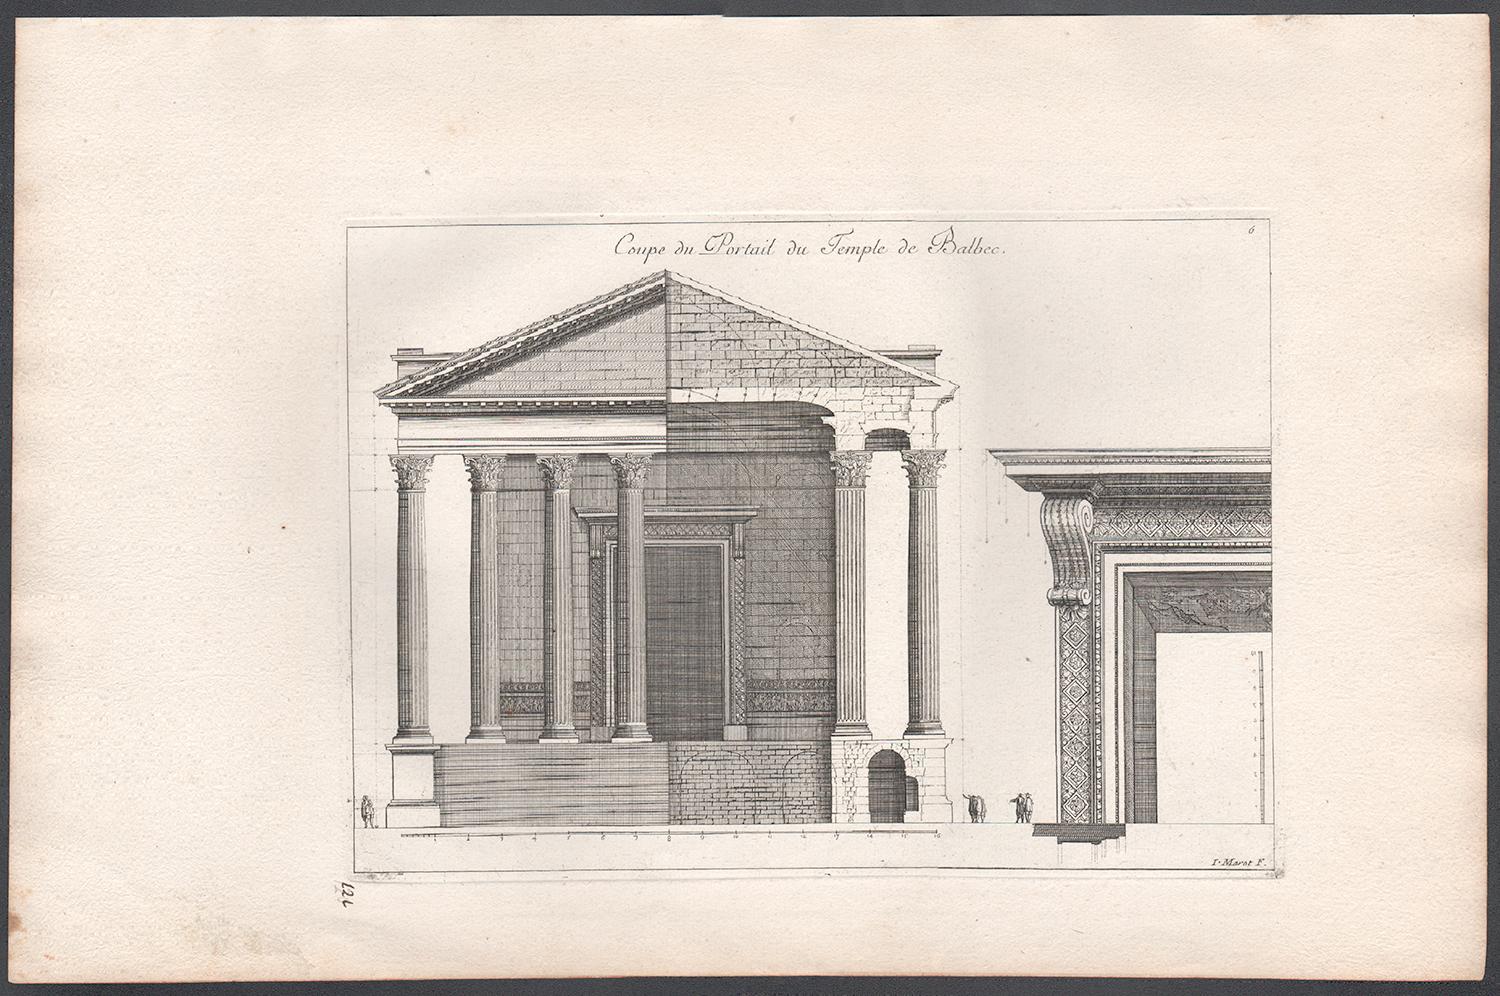 Temple of Baalbec, Lebanon, Classical Roman architectural engraving, Jean Marot 1